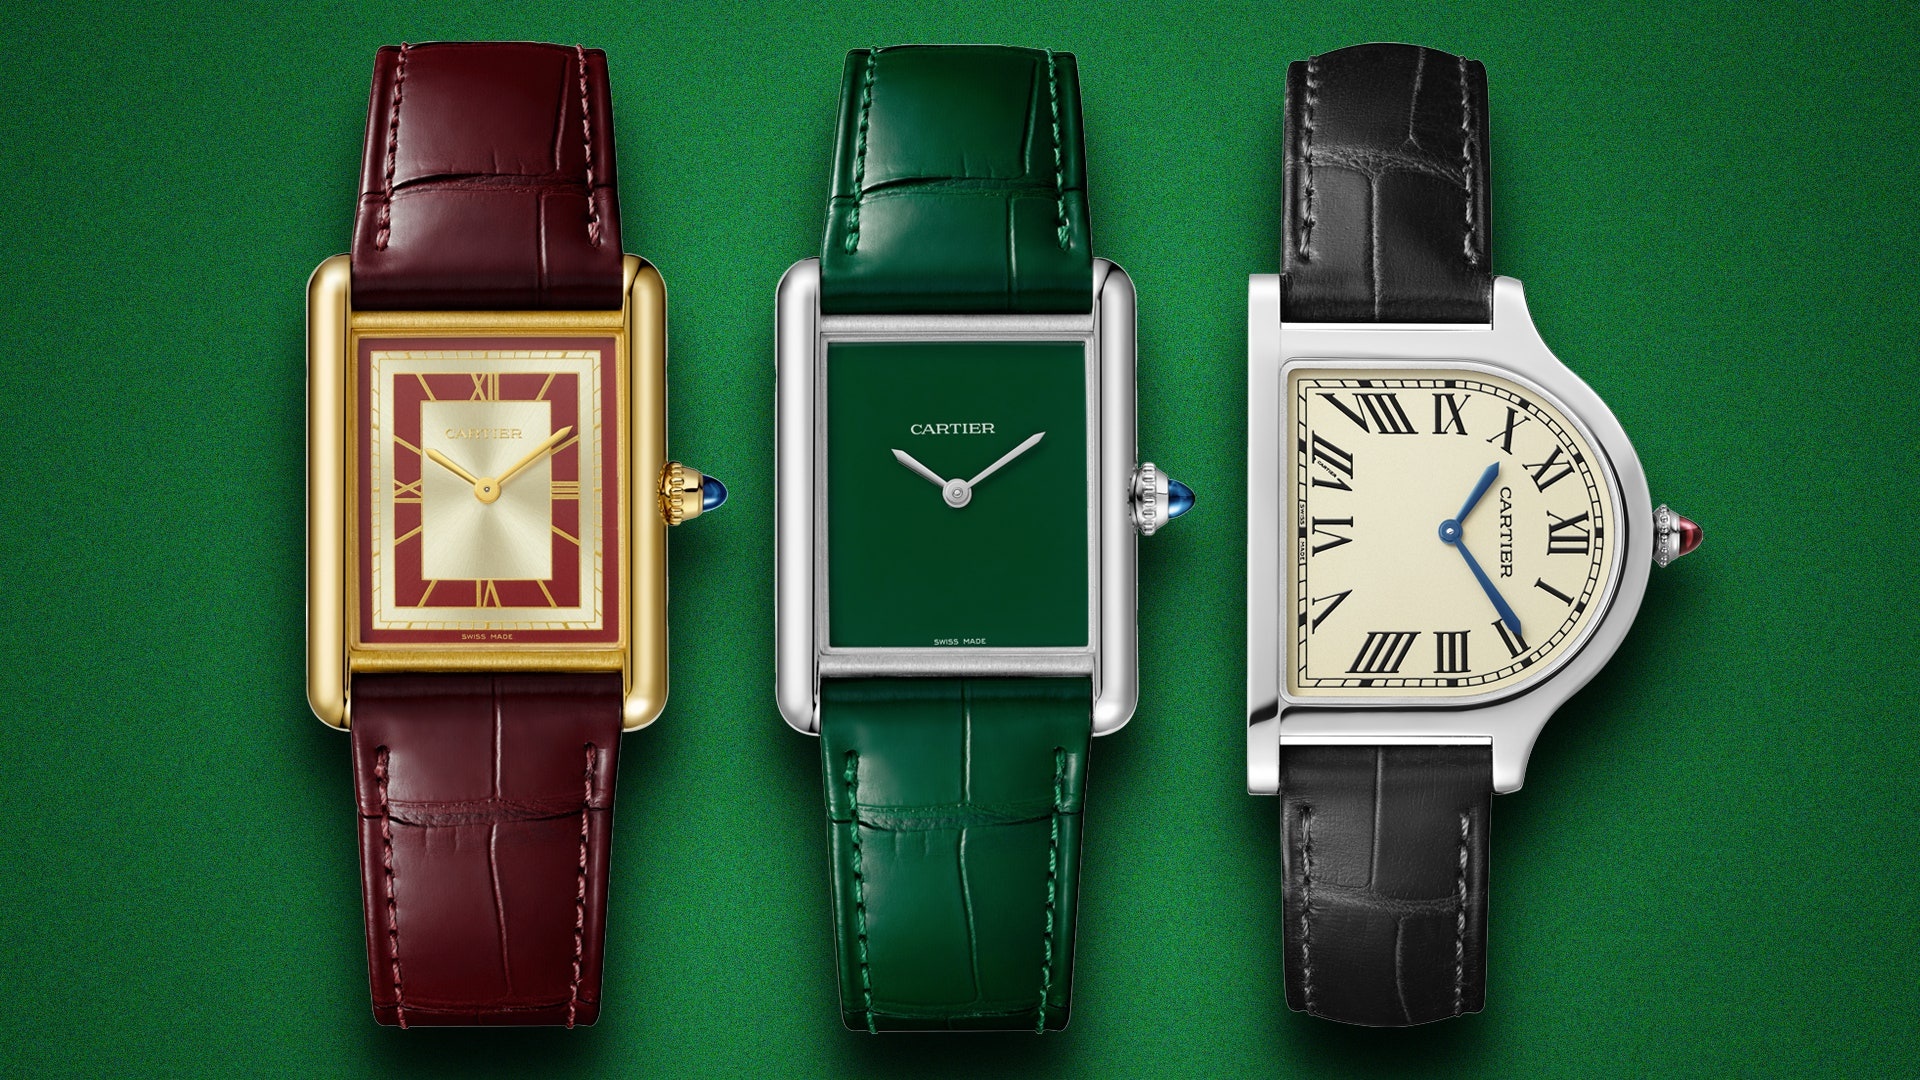 Cartier: Tank Must, Luxury watches, The brand founded in mid-nineteenth century France. 1920x1080 Full HD Background.